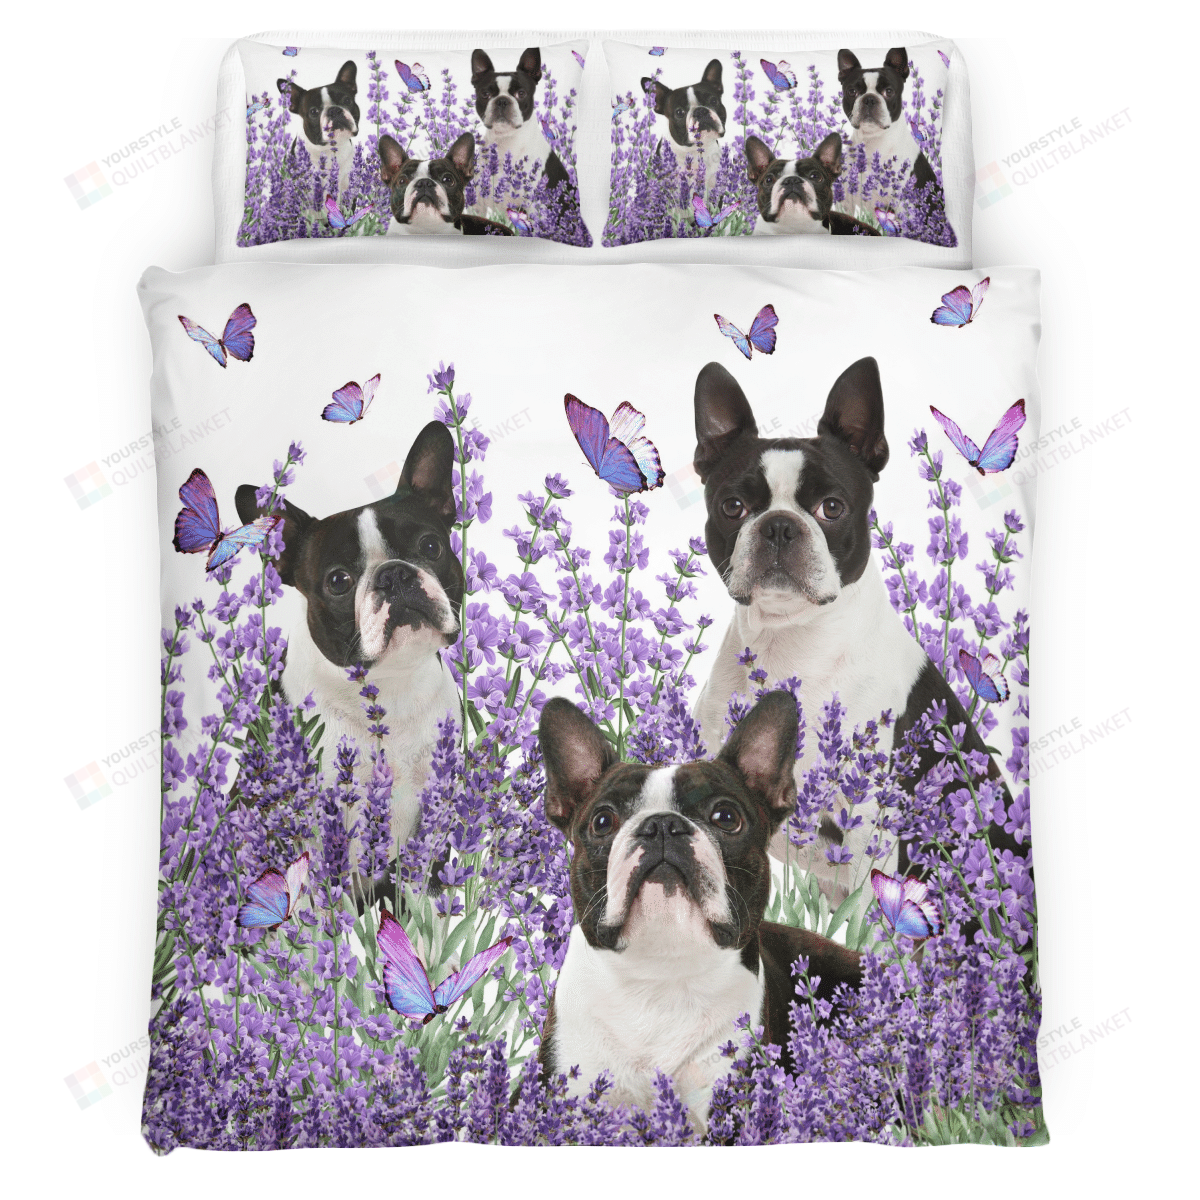 Boston Terrier And Lavender Cotton Bed Sheets Spread Comforter Duvet Cover Bedding Sets.Png